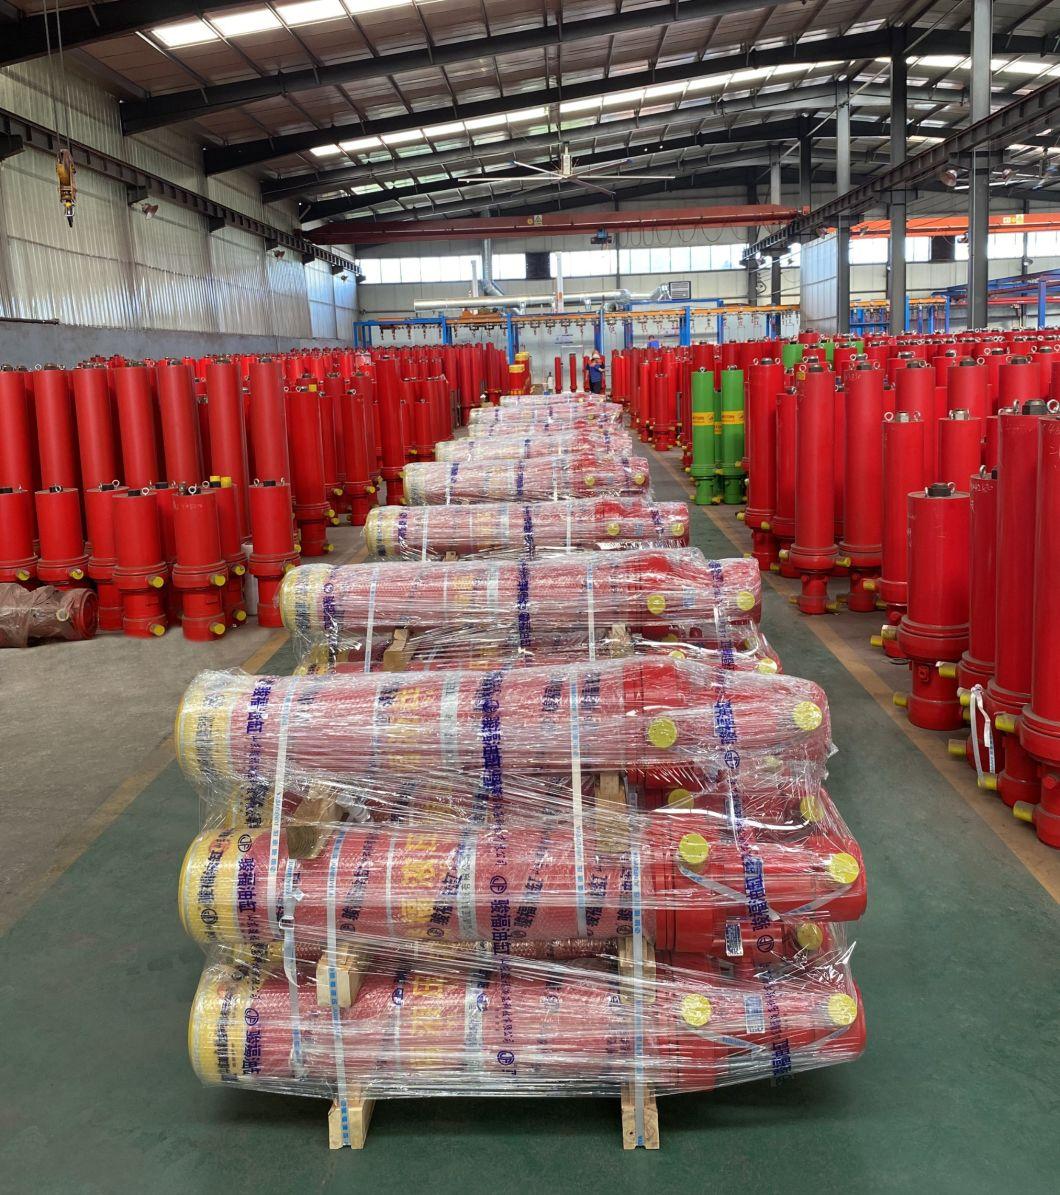 3 Stage Hydraulic Telescopic Cylinder for Dump Truck